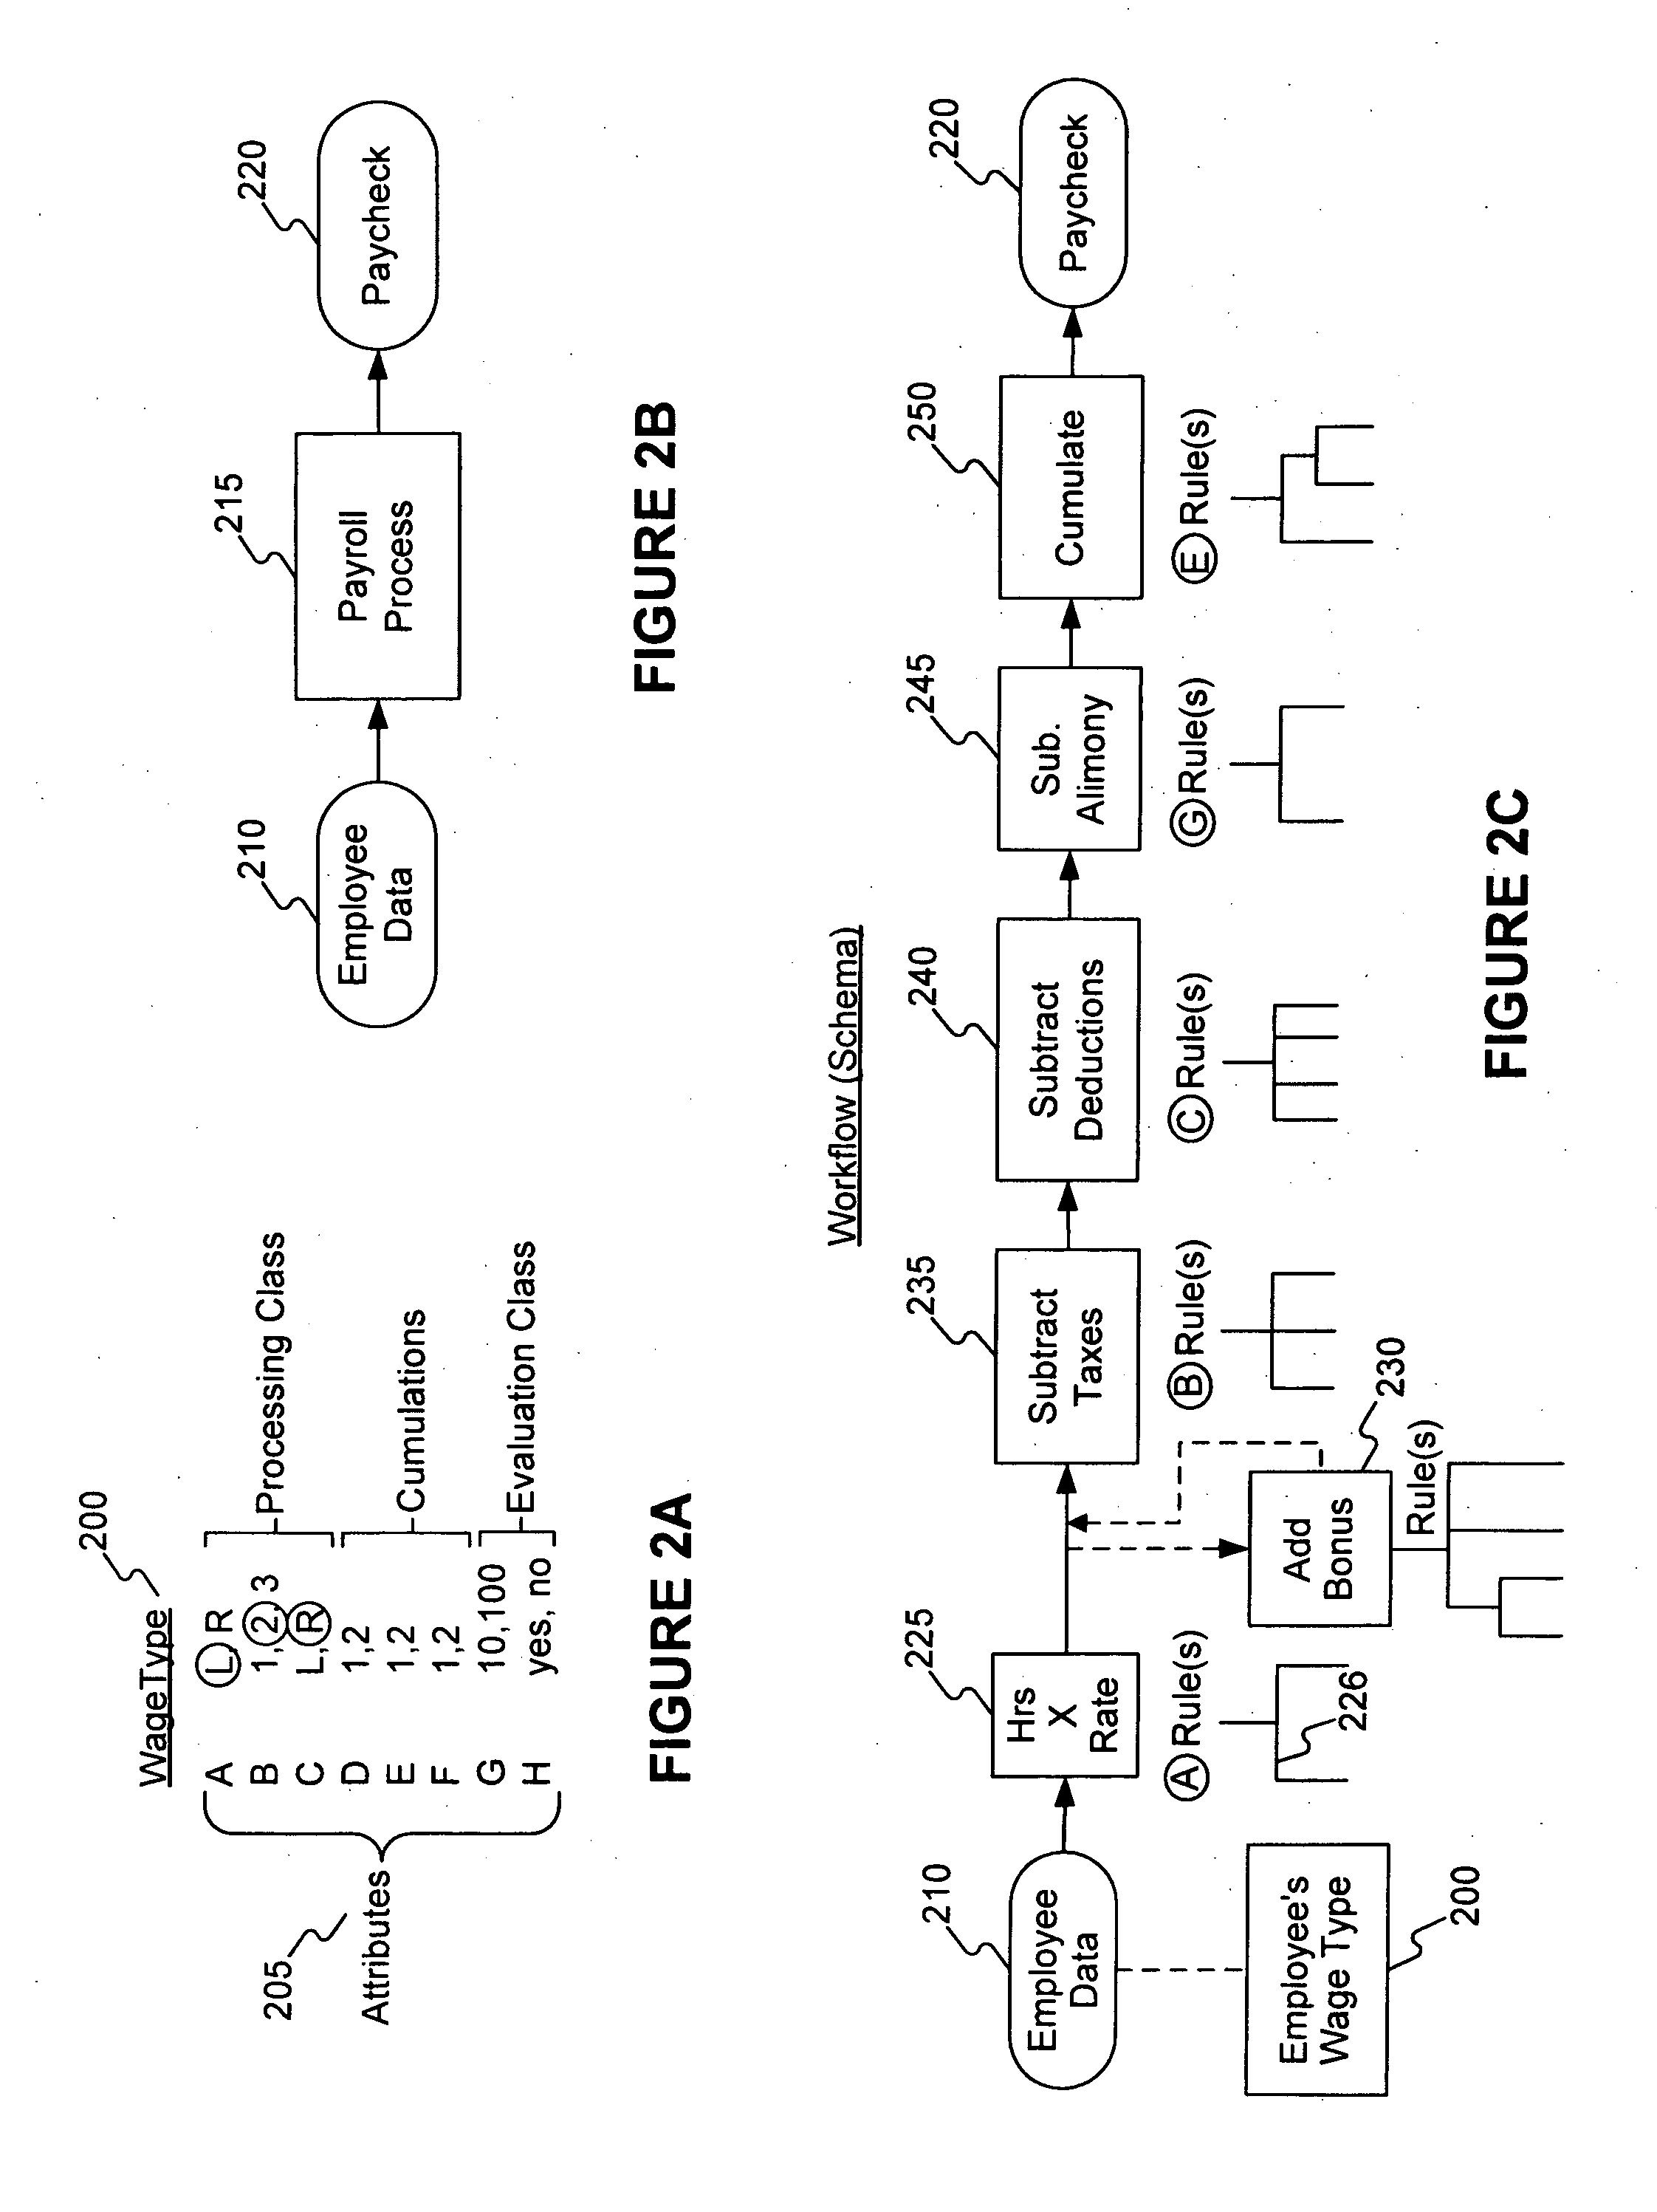 Methods and systems for incrementally exposing business application errors using an integrated display